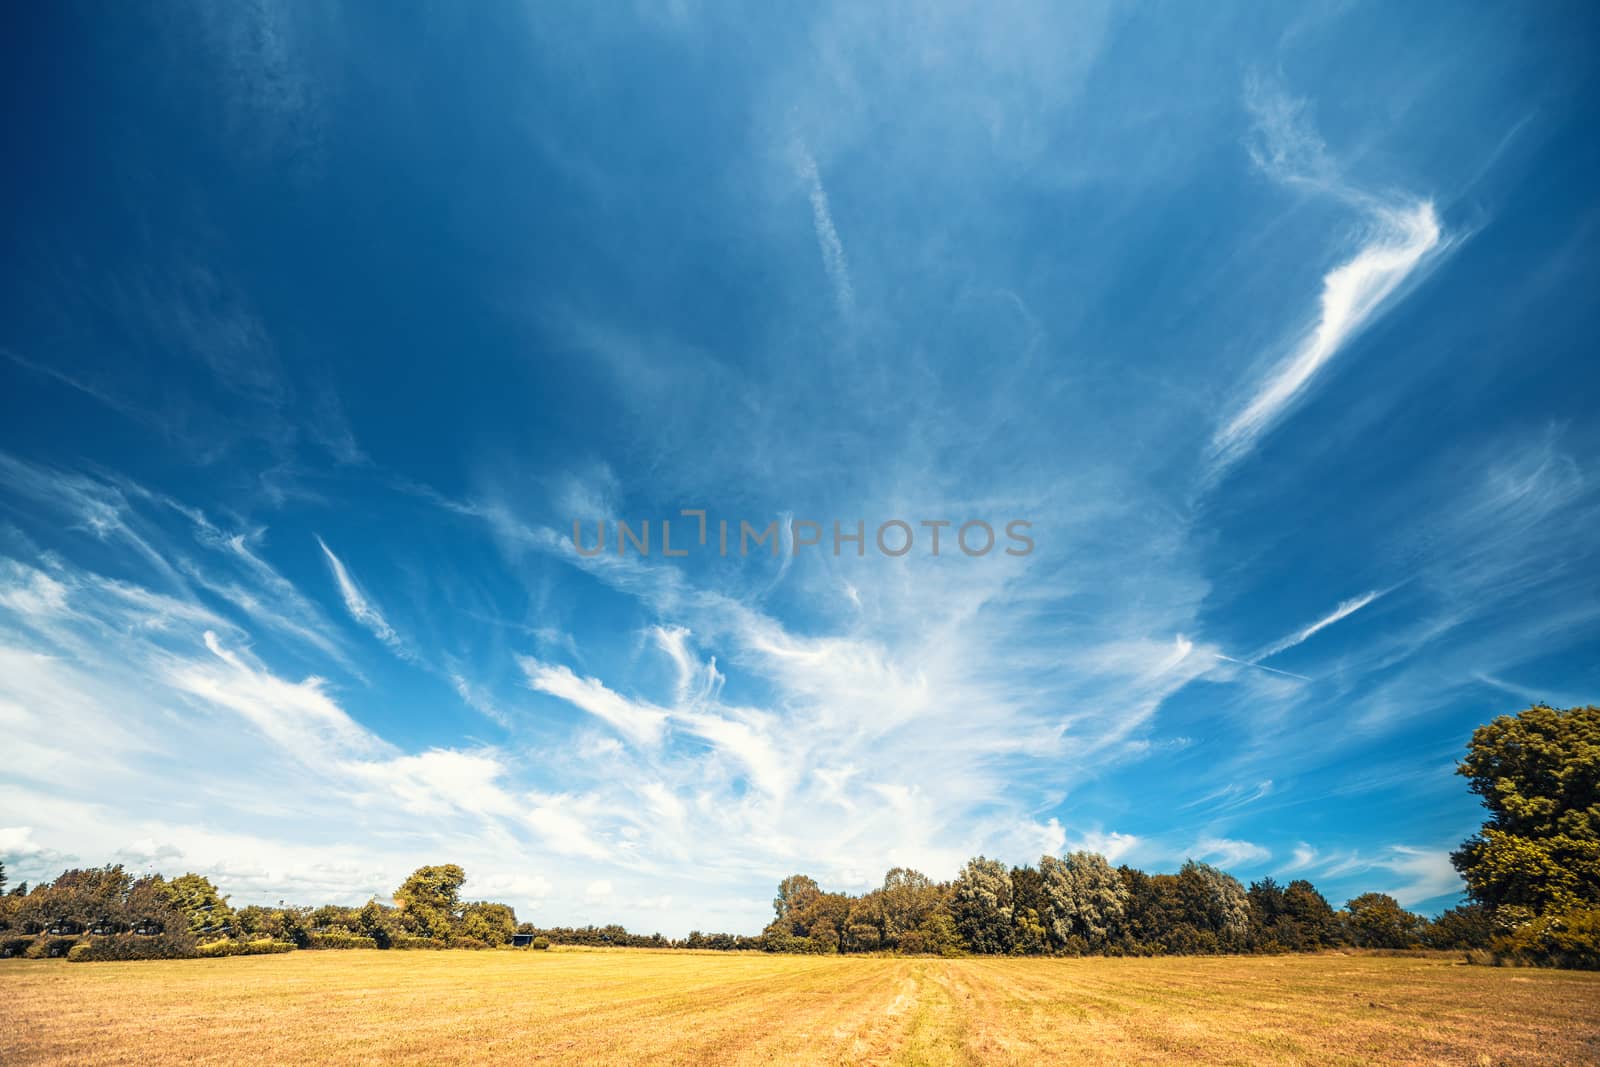 Countryside landscape with a dramatic blue sky over dry fields in the late summer